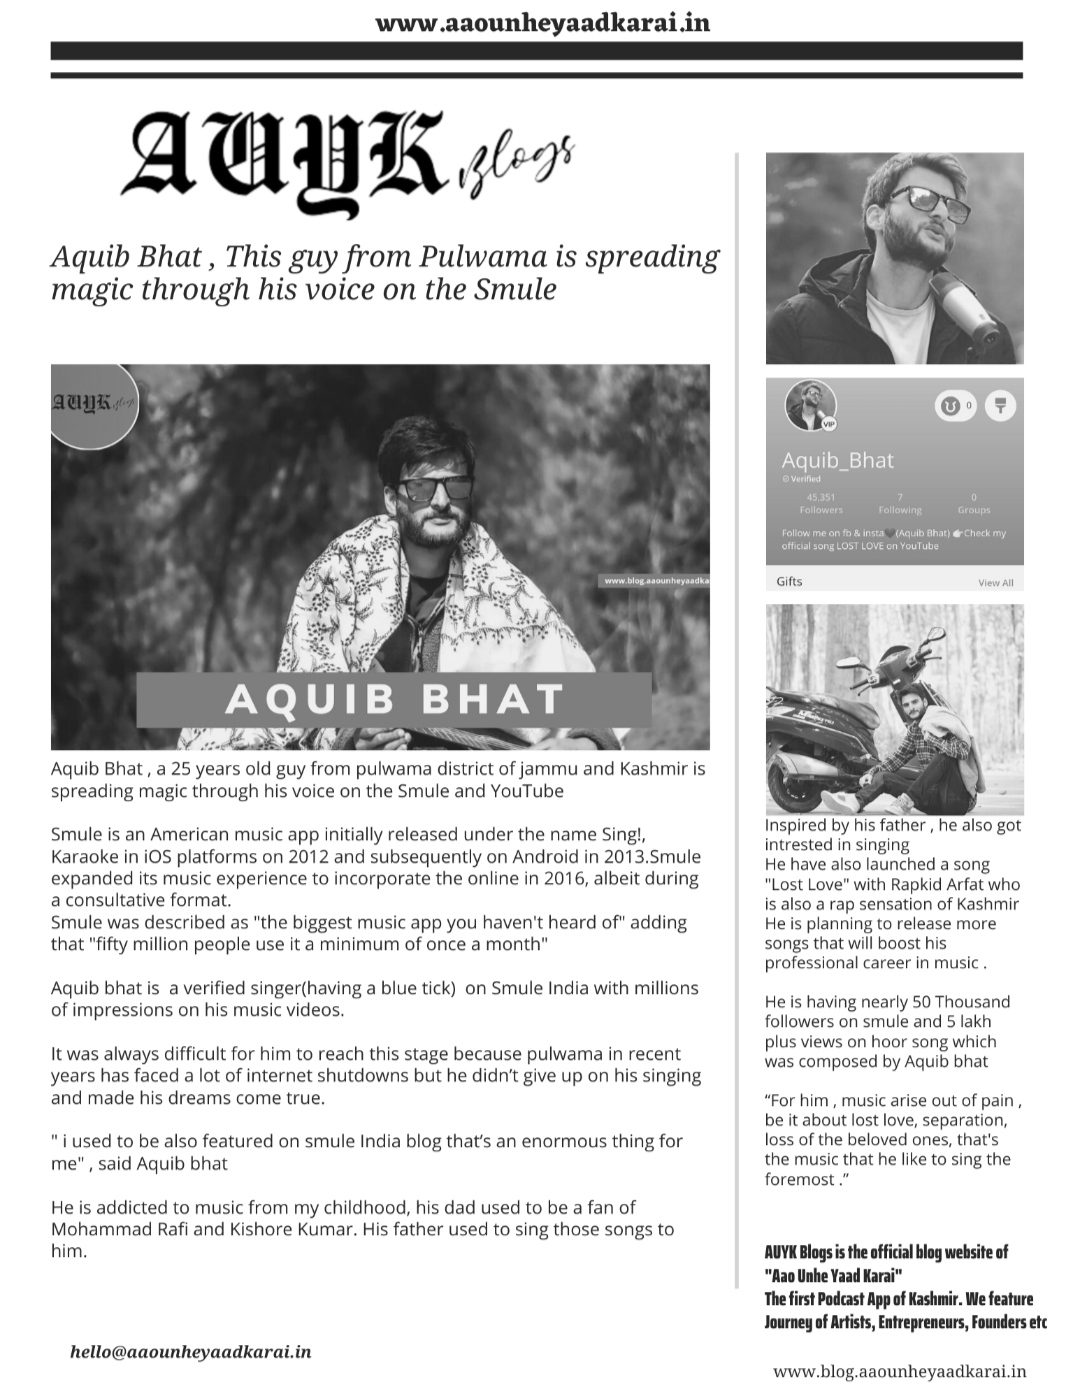 Aquib Bhat , A 25 years old guy from Pulwama is spreading magic through his voice on the Smule